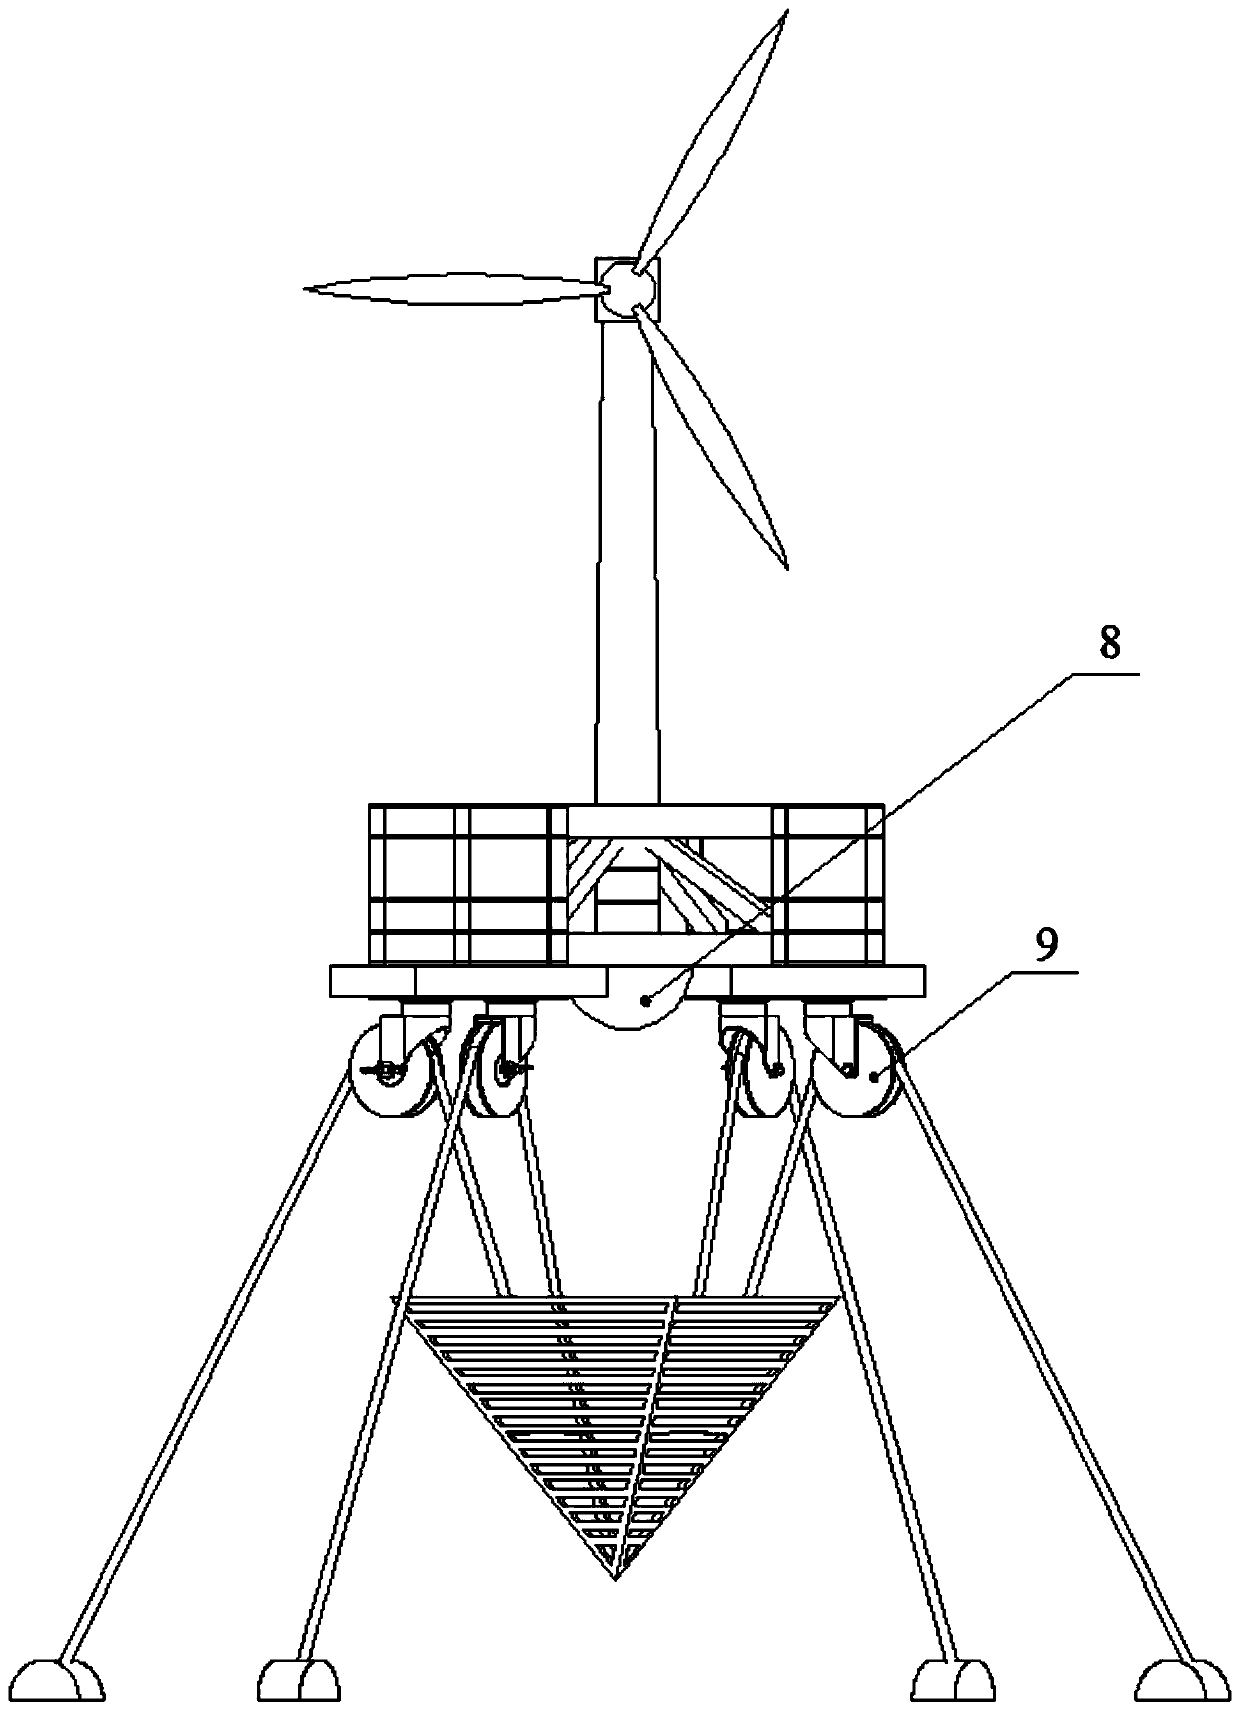 An Offshore Floating Wind Turbine with Adjustable Balance